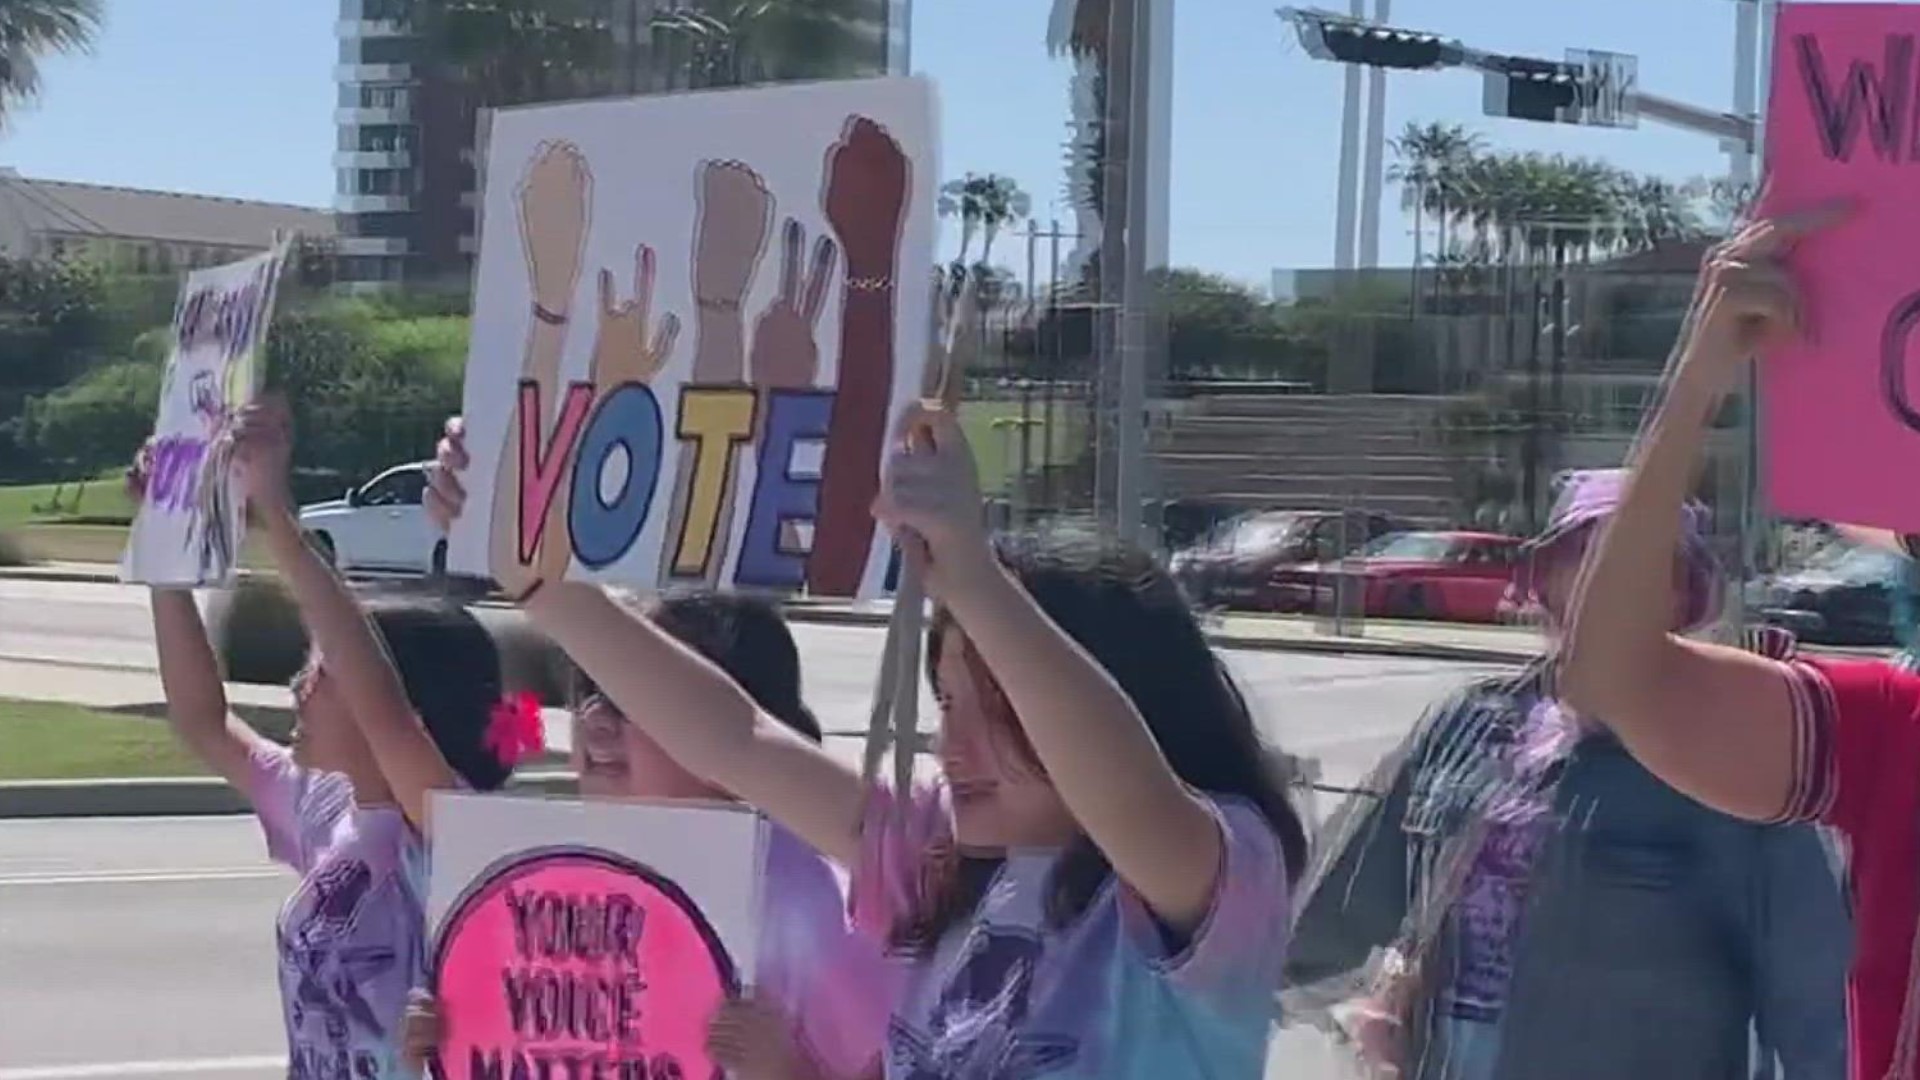 "This takeaway is a celebration, but it's also a reminder that we can't sit back," said Kathryn Oler, President of the League of Women Voters - Corpus Christi.